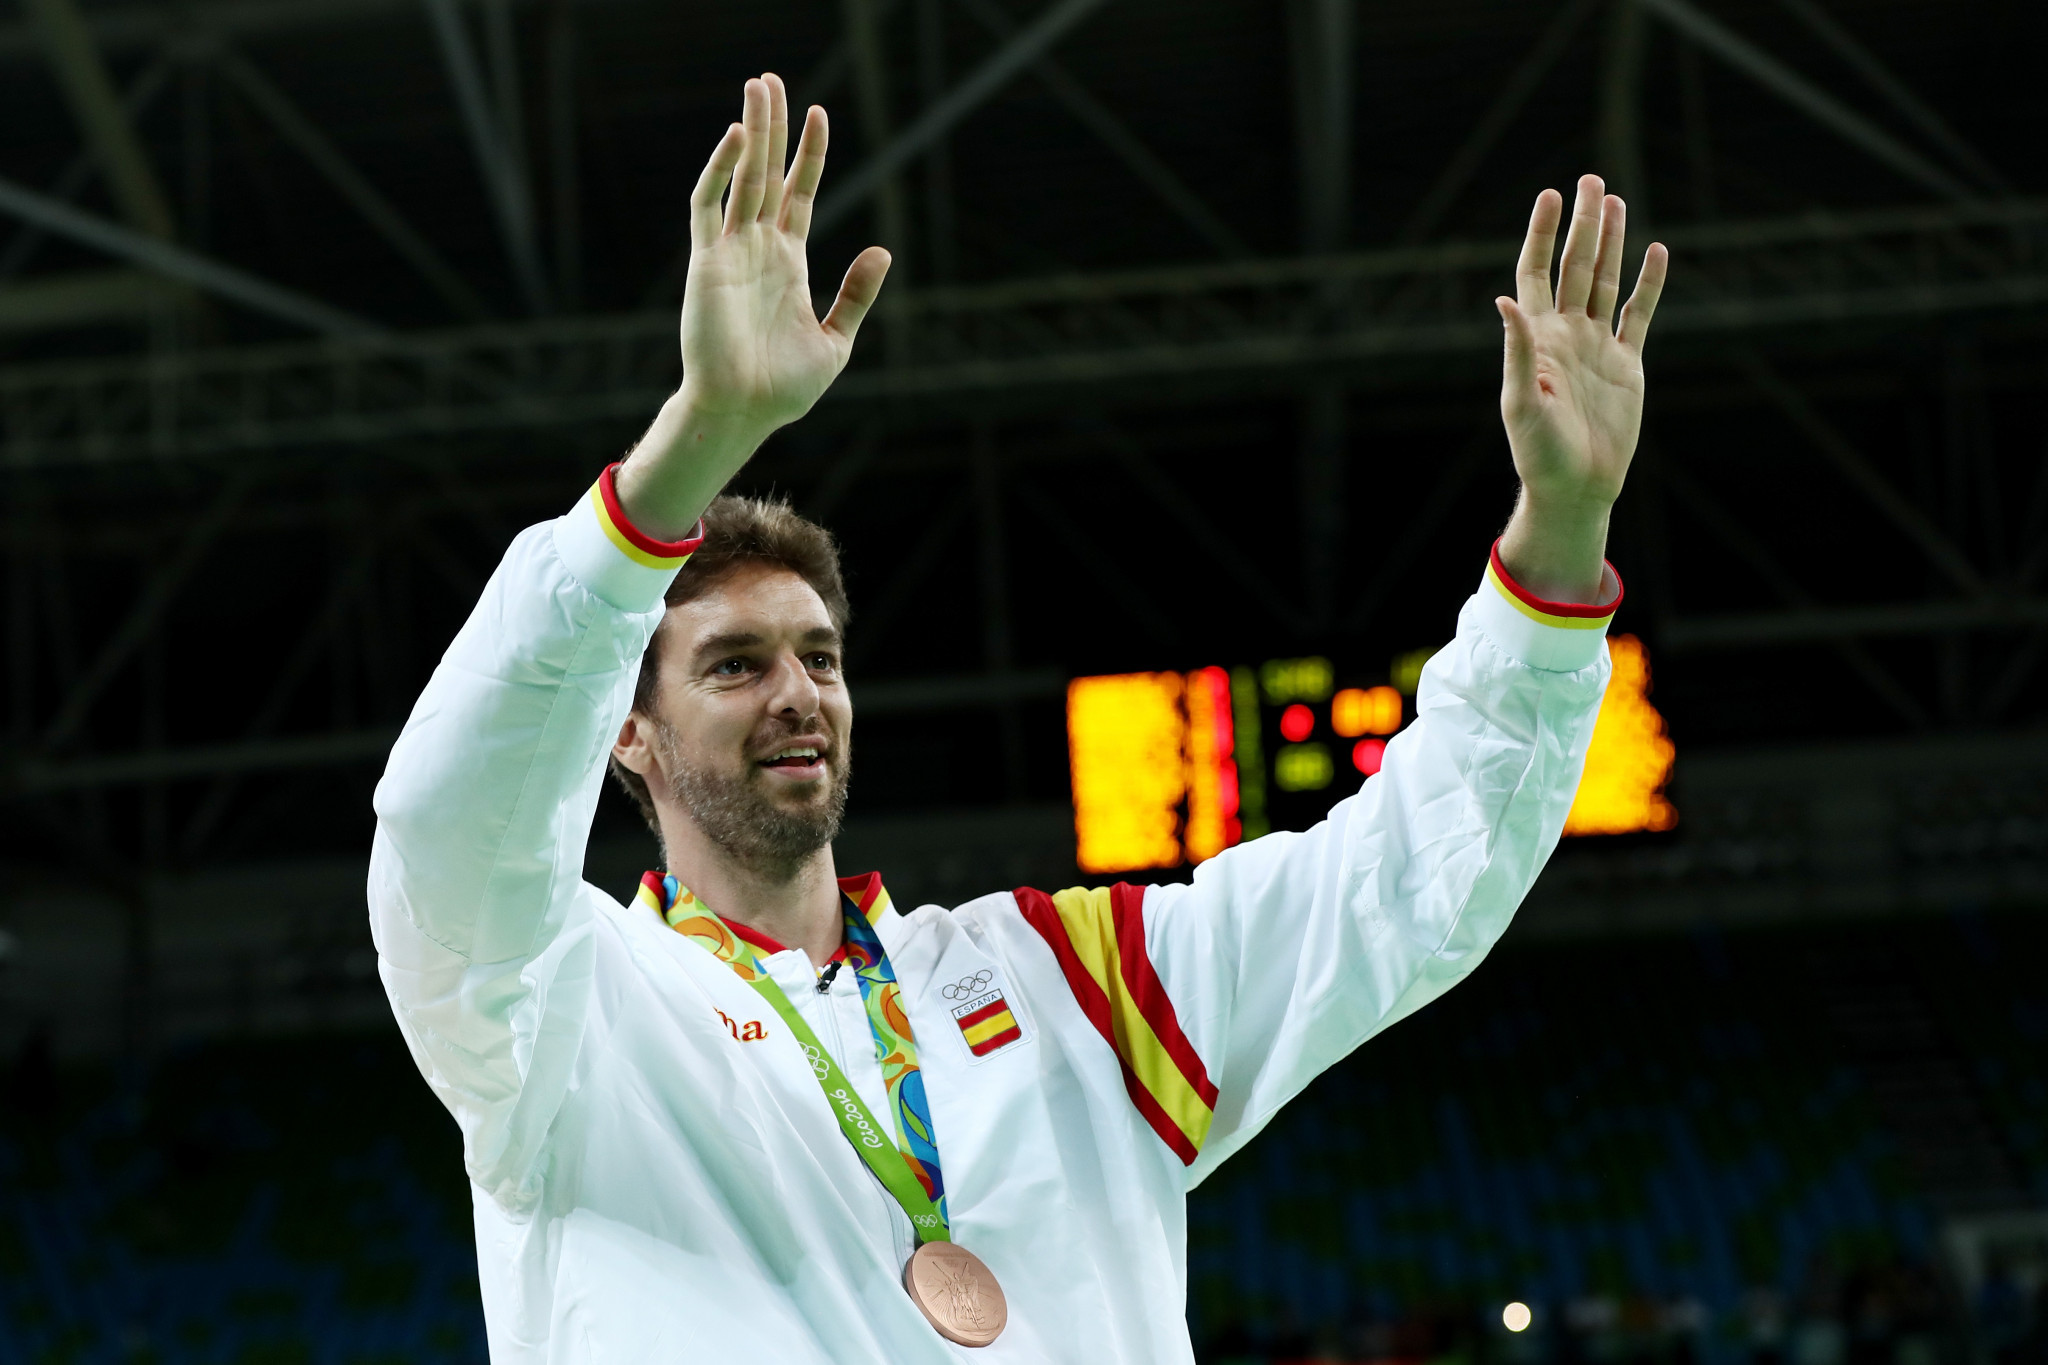 Pau Gasol has won three Olympic medals during his career ©Getty Images